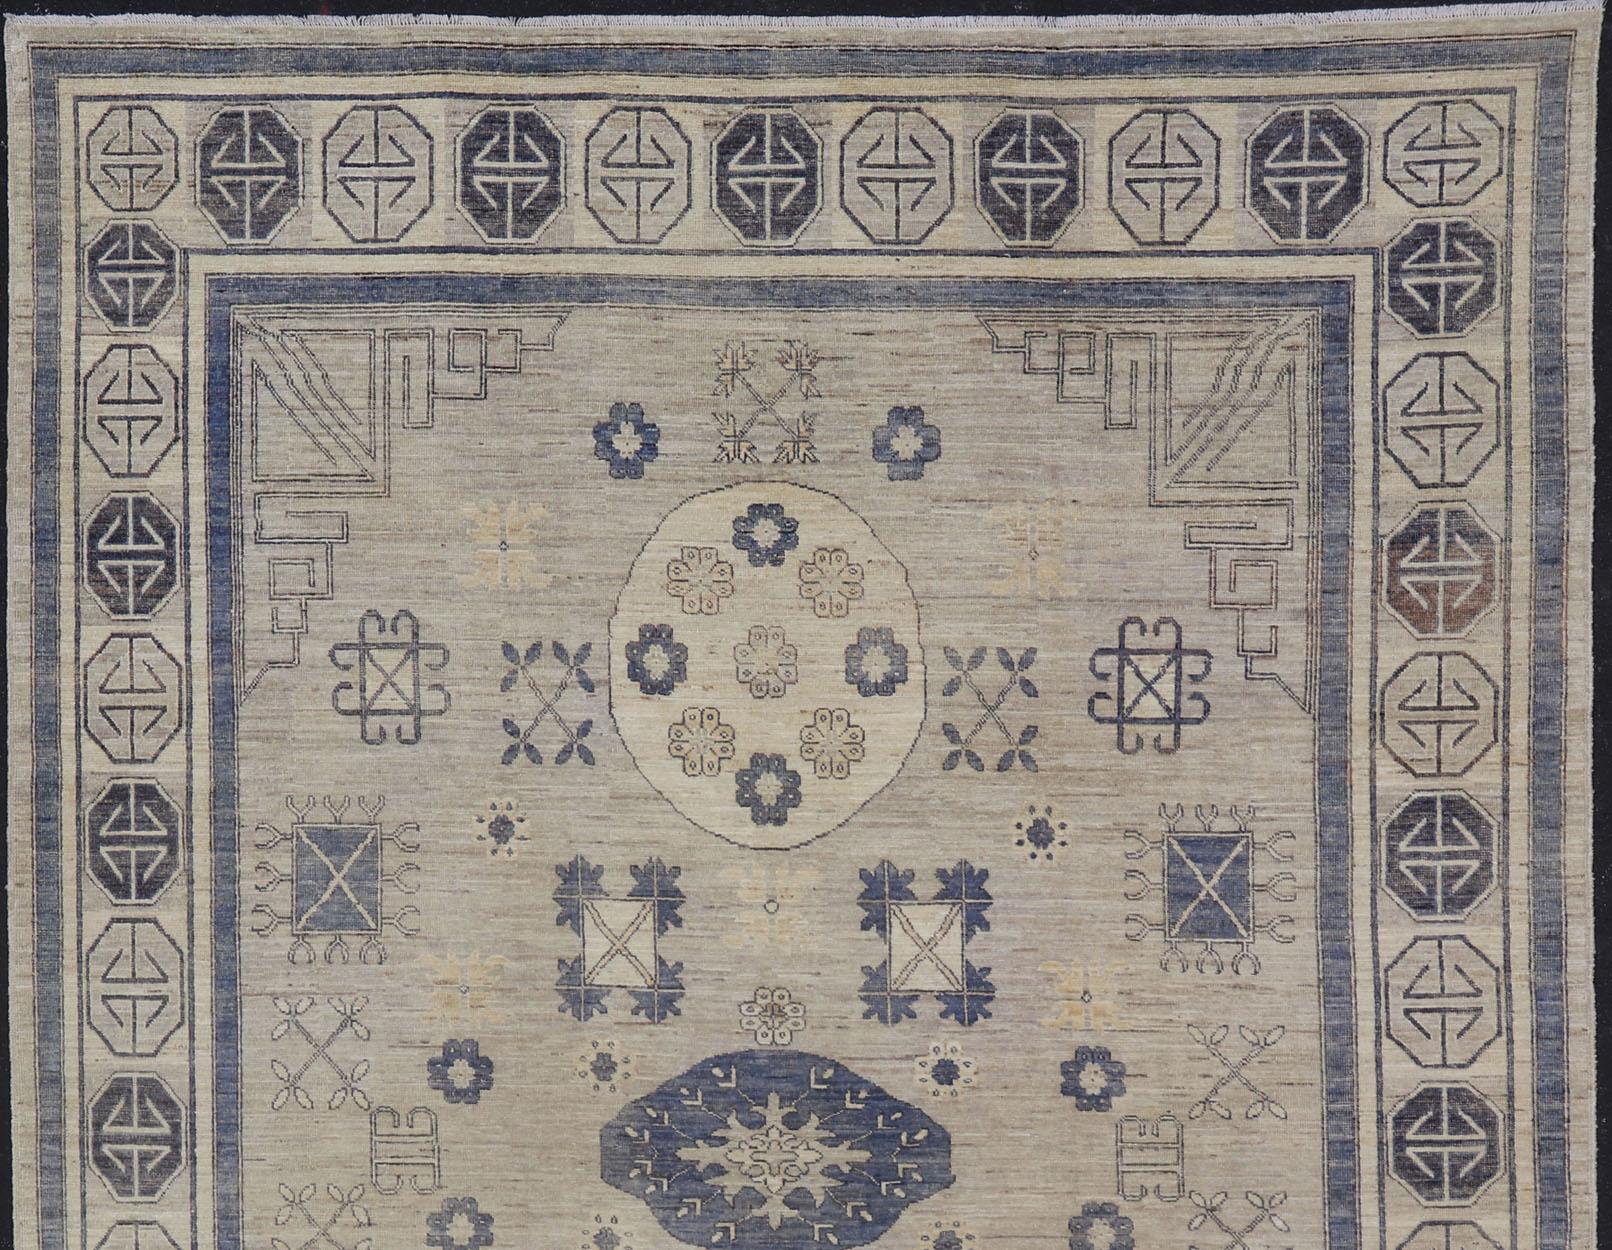 Khotan Design rug with Geometric Medallions in royal blue and ivory, Geometric Khotan rug AFG-36099, Keivan Woven Arts / country of origin / type: Afghanistan / Khotan

This Khotan features multi-medallion geometric design flanked by a repeating